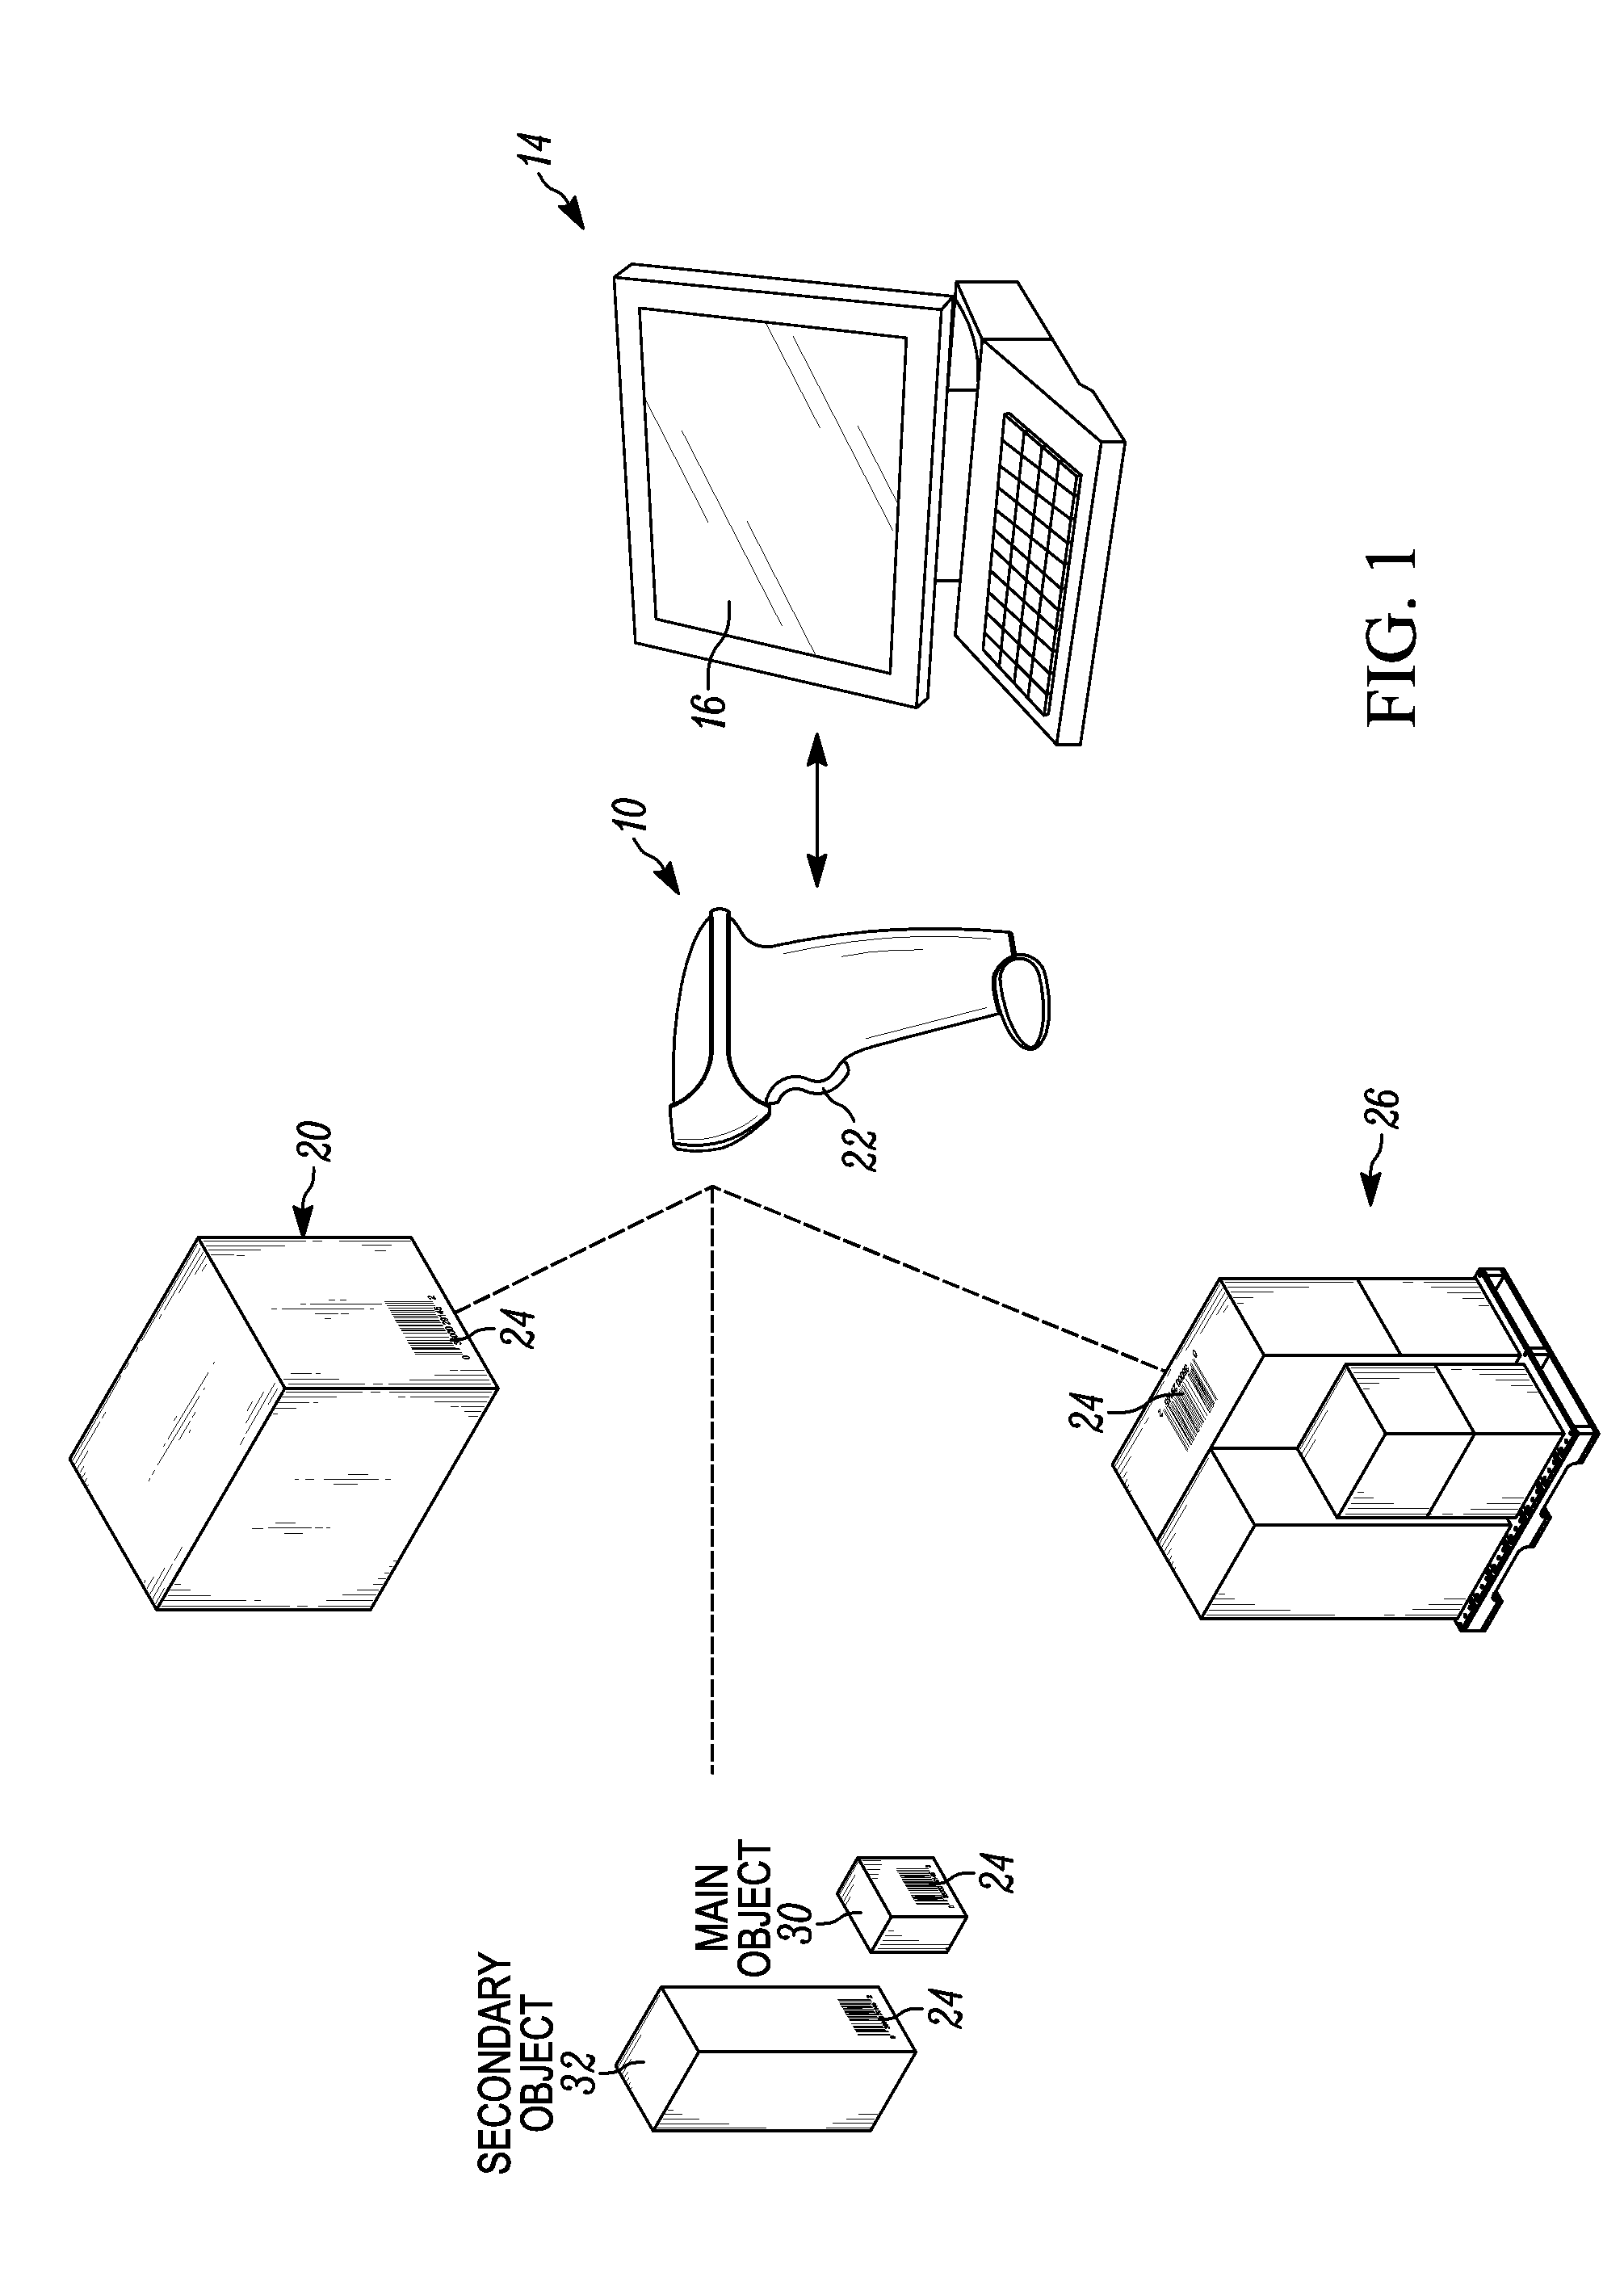 Apparatus for and method of estimating dimensions of an object associated with a code in automatic response to reading the code